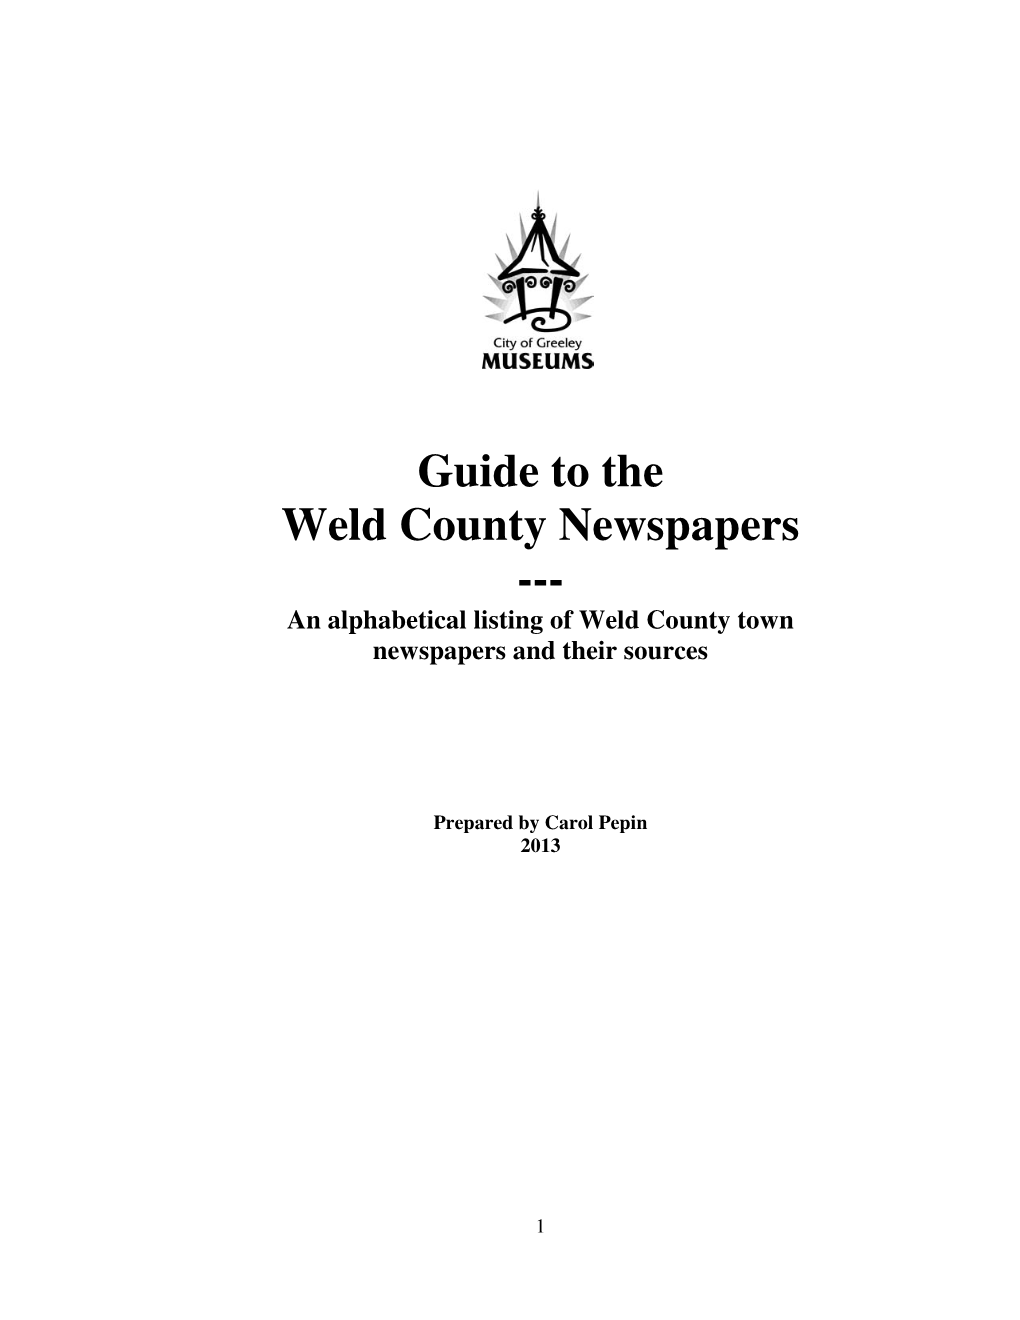 Guide to the Weld County Newspapers --- an Alphabetical Listing of Weld County Town Newspapers and Their Sources